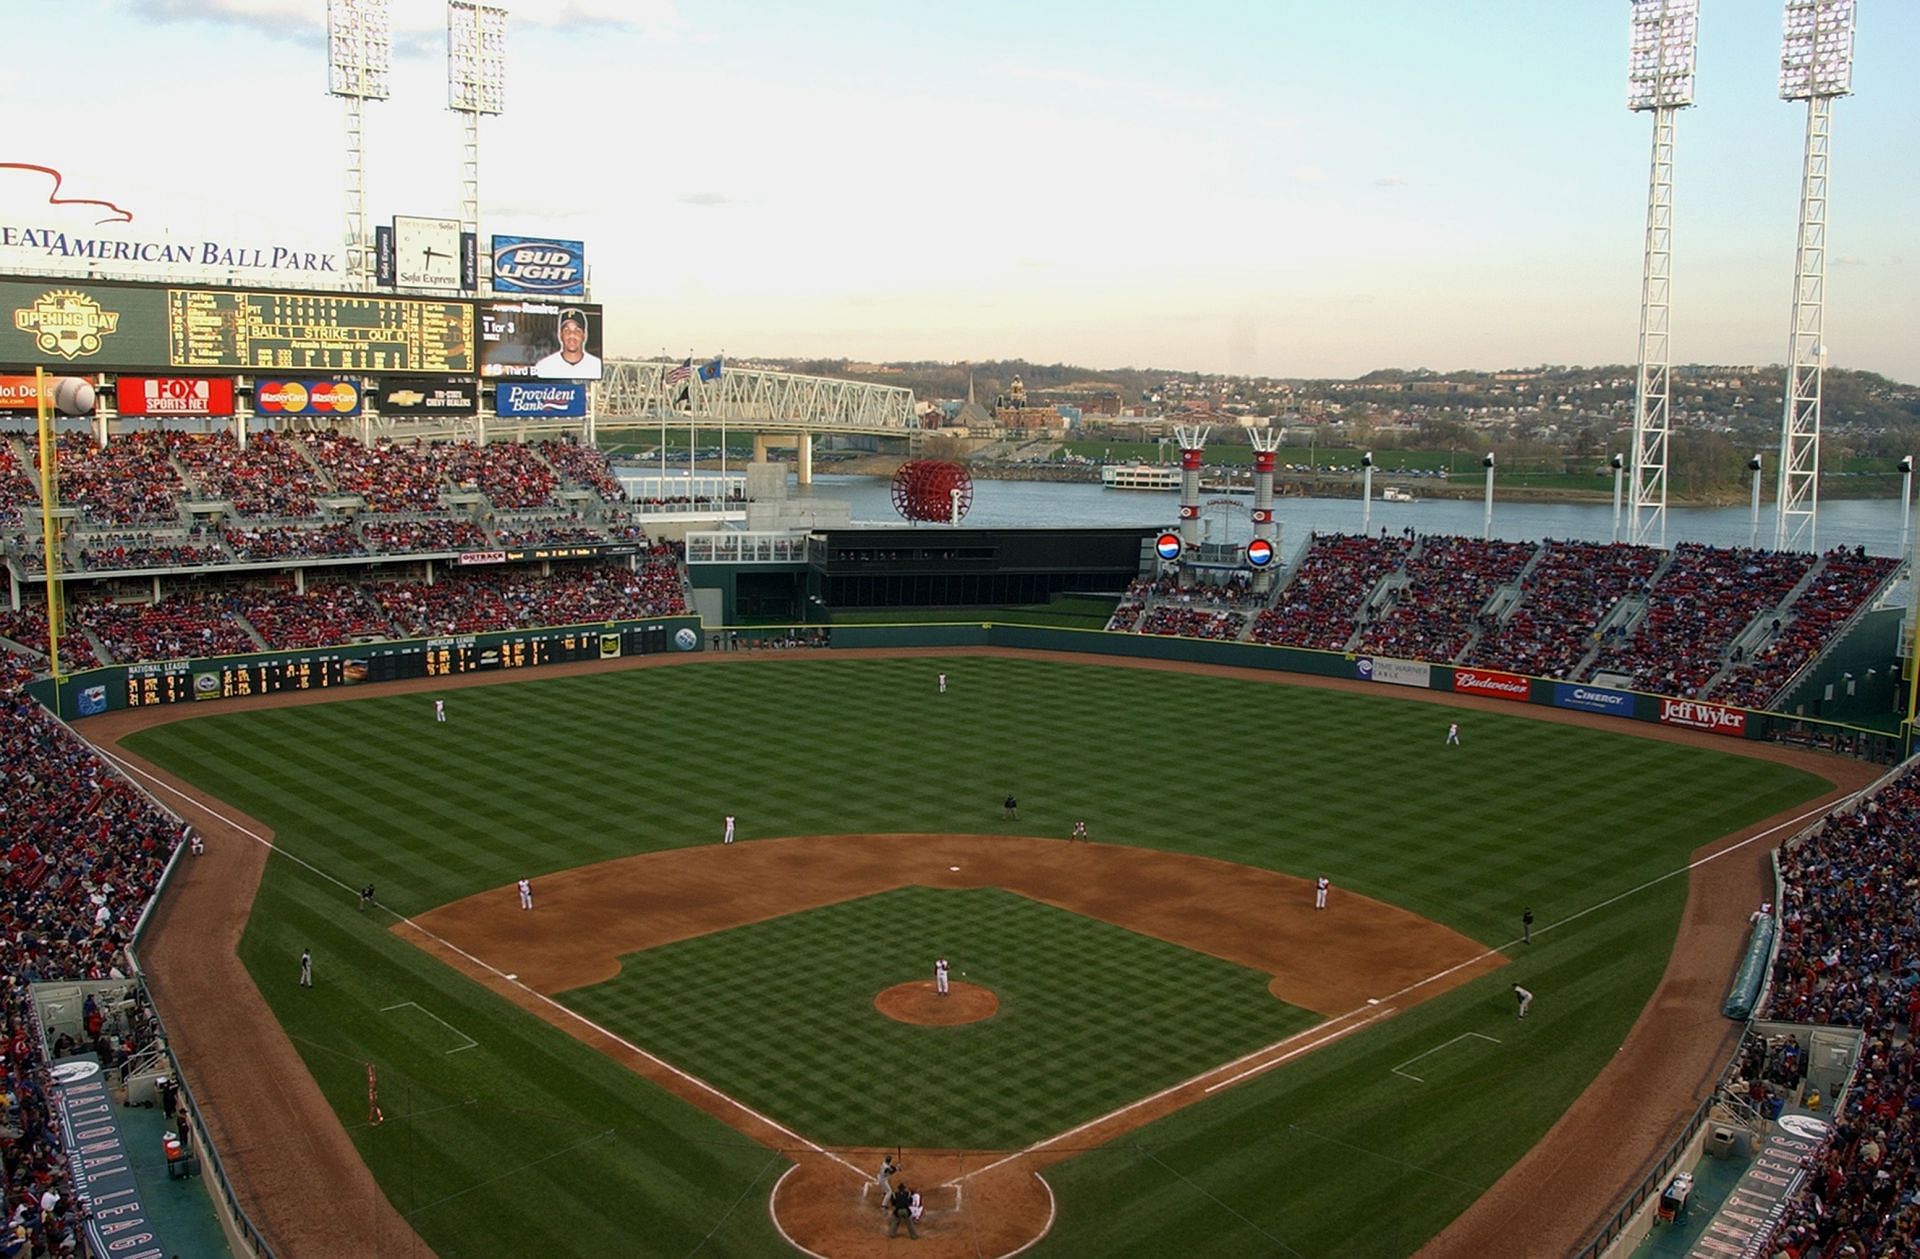 Great American Ball Park, home of the Reds